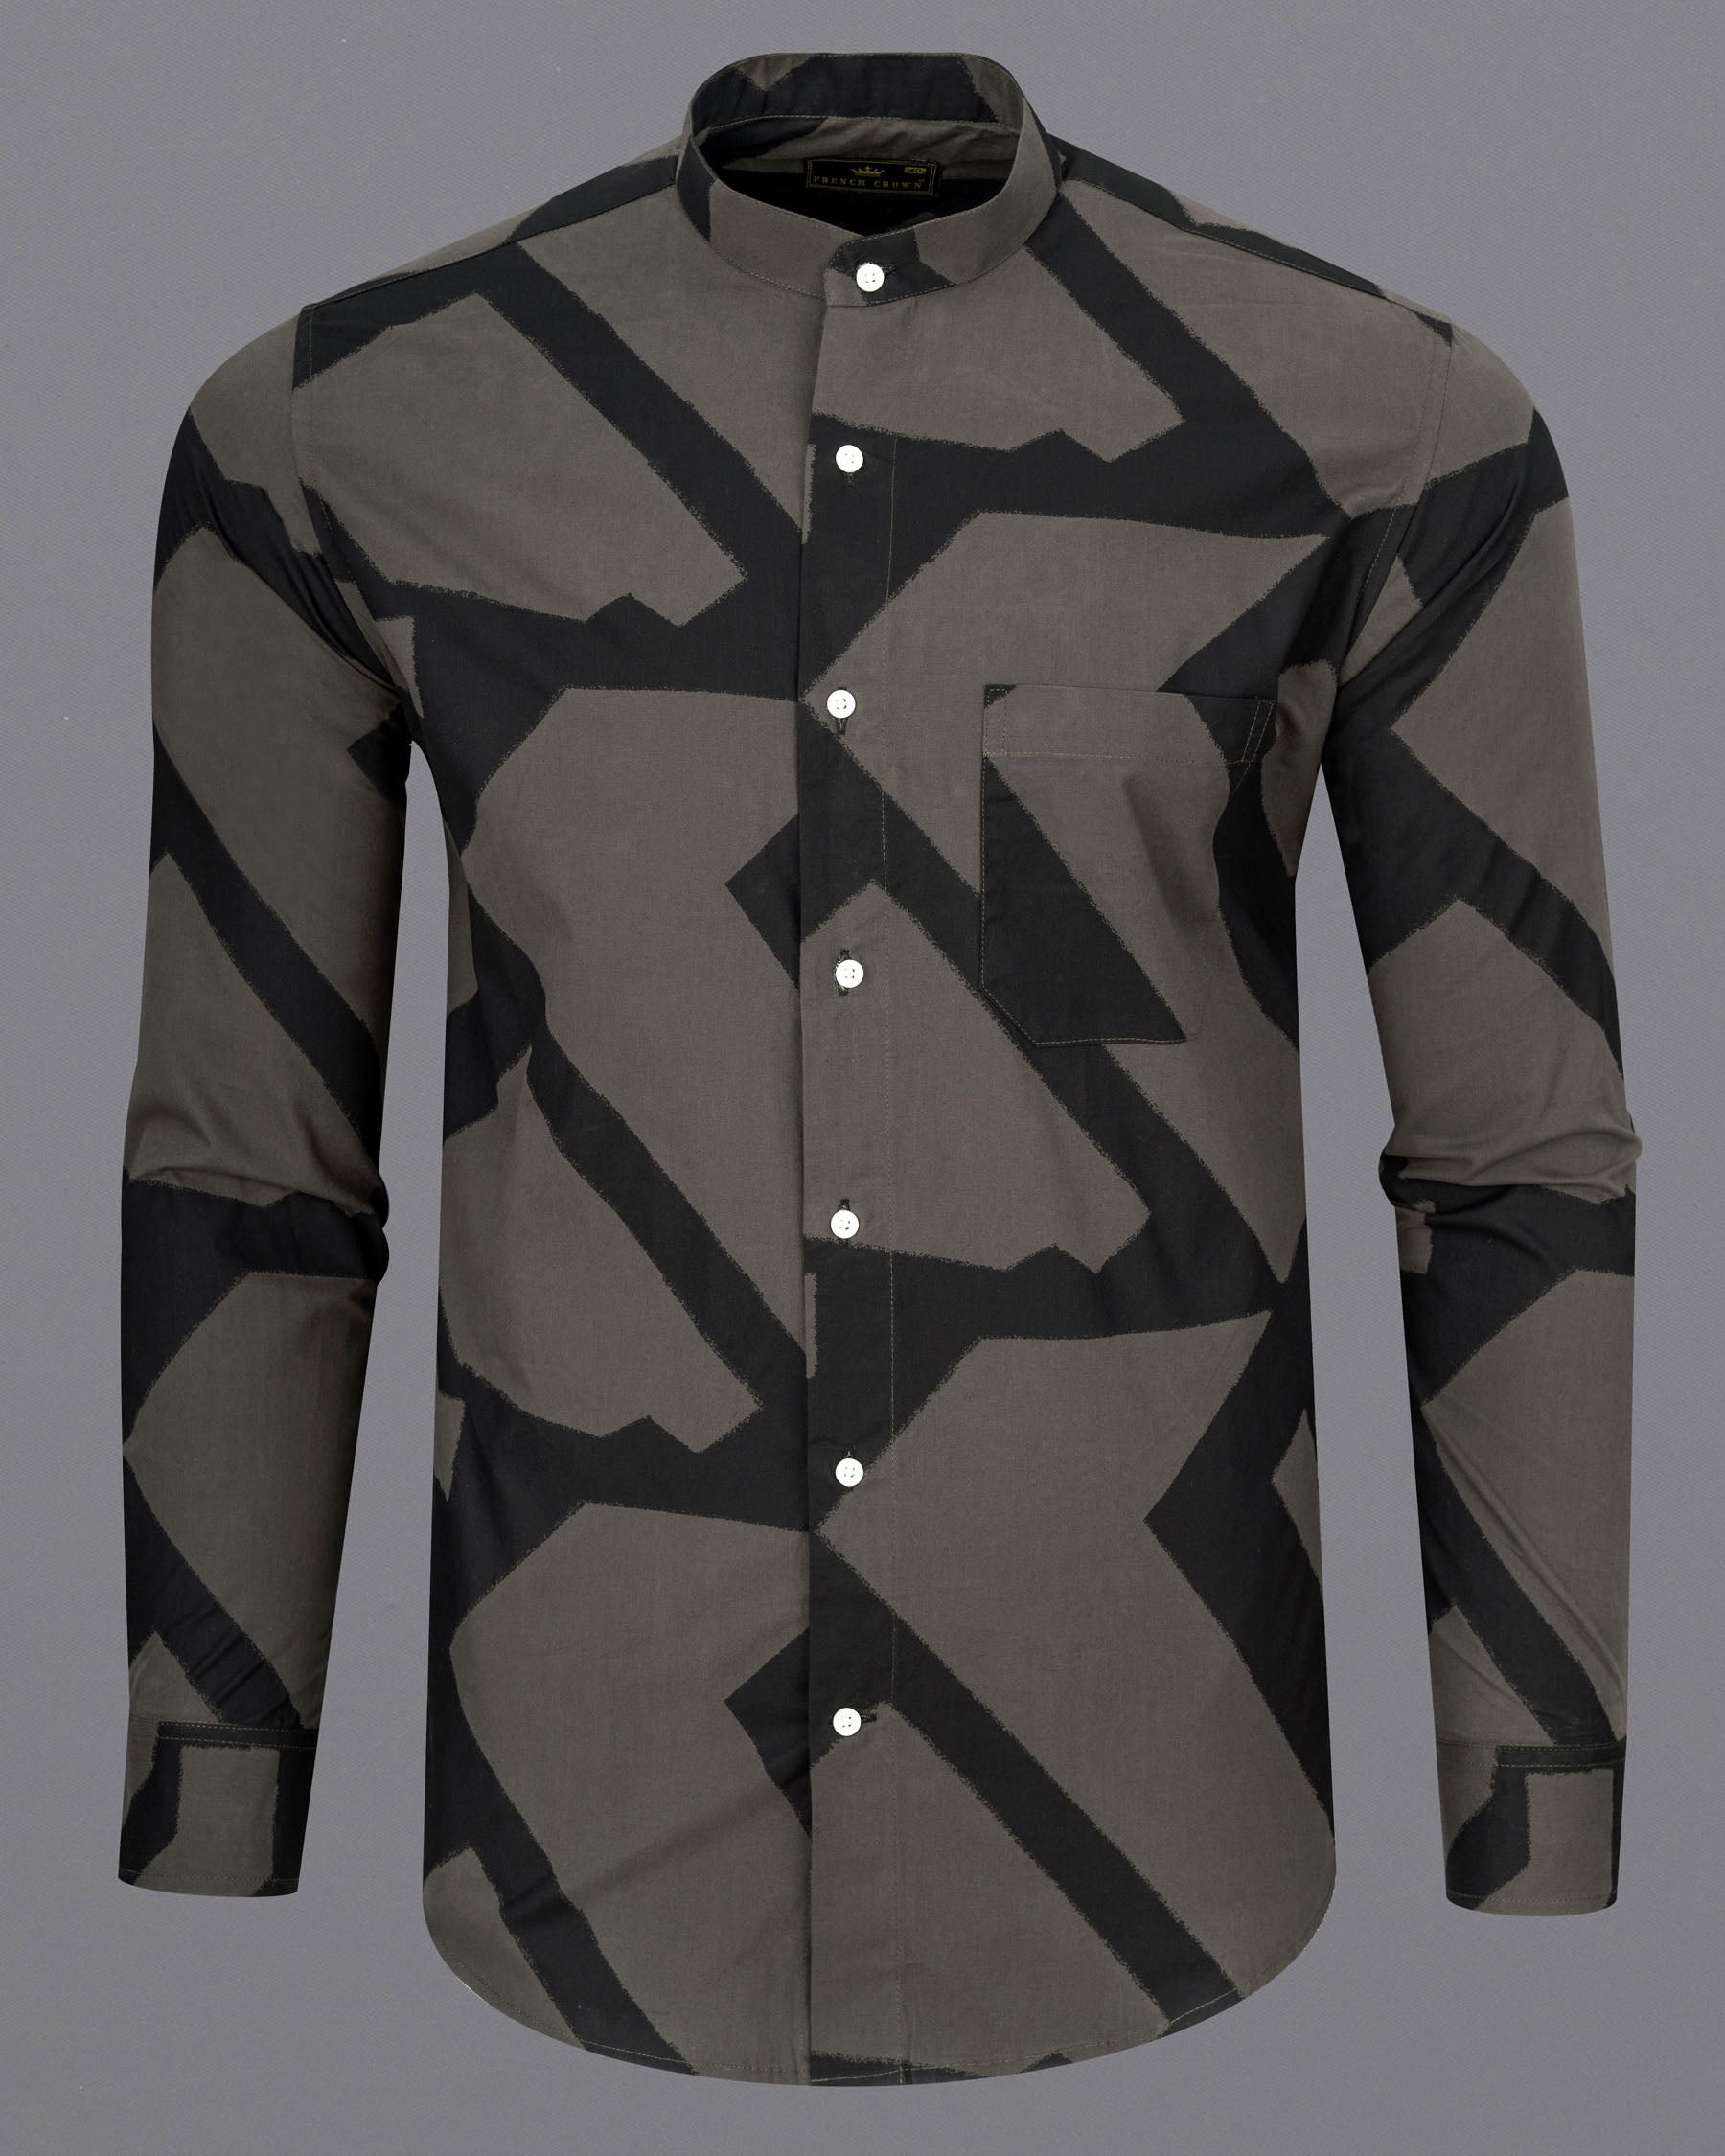 Fuscous Grey with Zeus Black abstract Patterned Premium Cotton Shirt 6861-M-38,6861-M-38,6861-M-39,6861-M-39,6861-M-40,6861-M-40,6861-M-42,6861-M-42,6861-M-44,6861-M-44,6861-M-46,6861-M-46,6861-M-48,6861-M-48,6861-M-50,6861-M-50,6861-M-52,6861-M-52